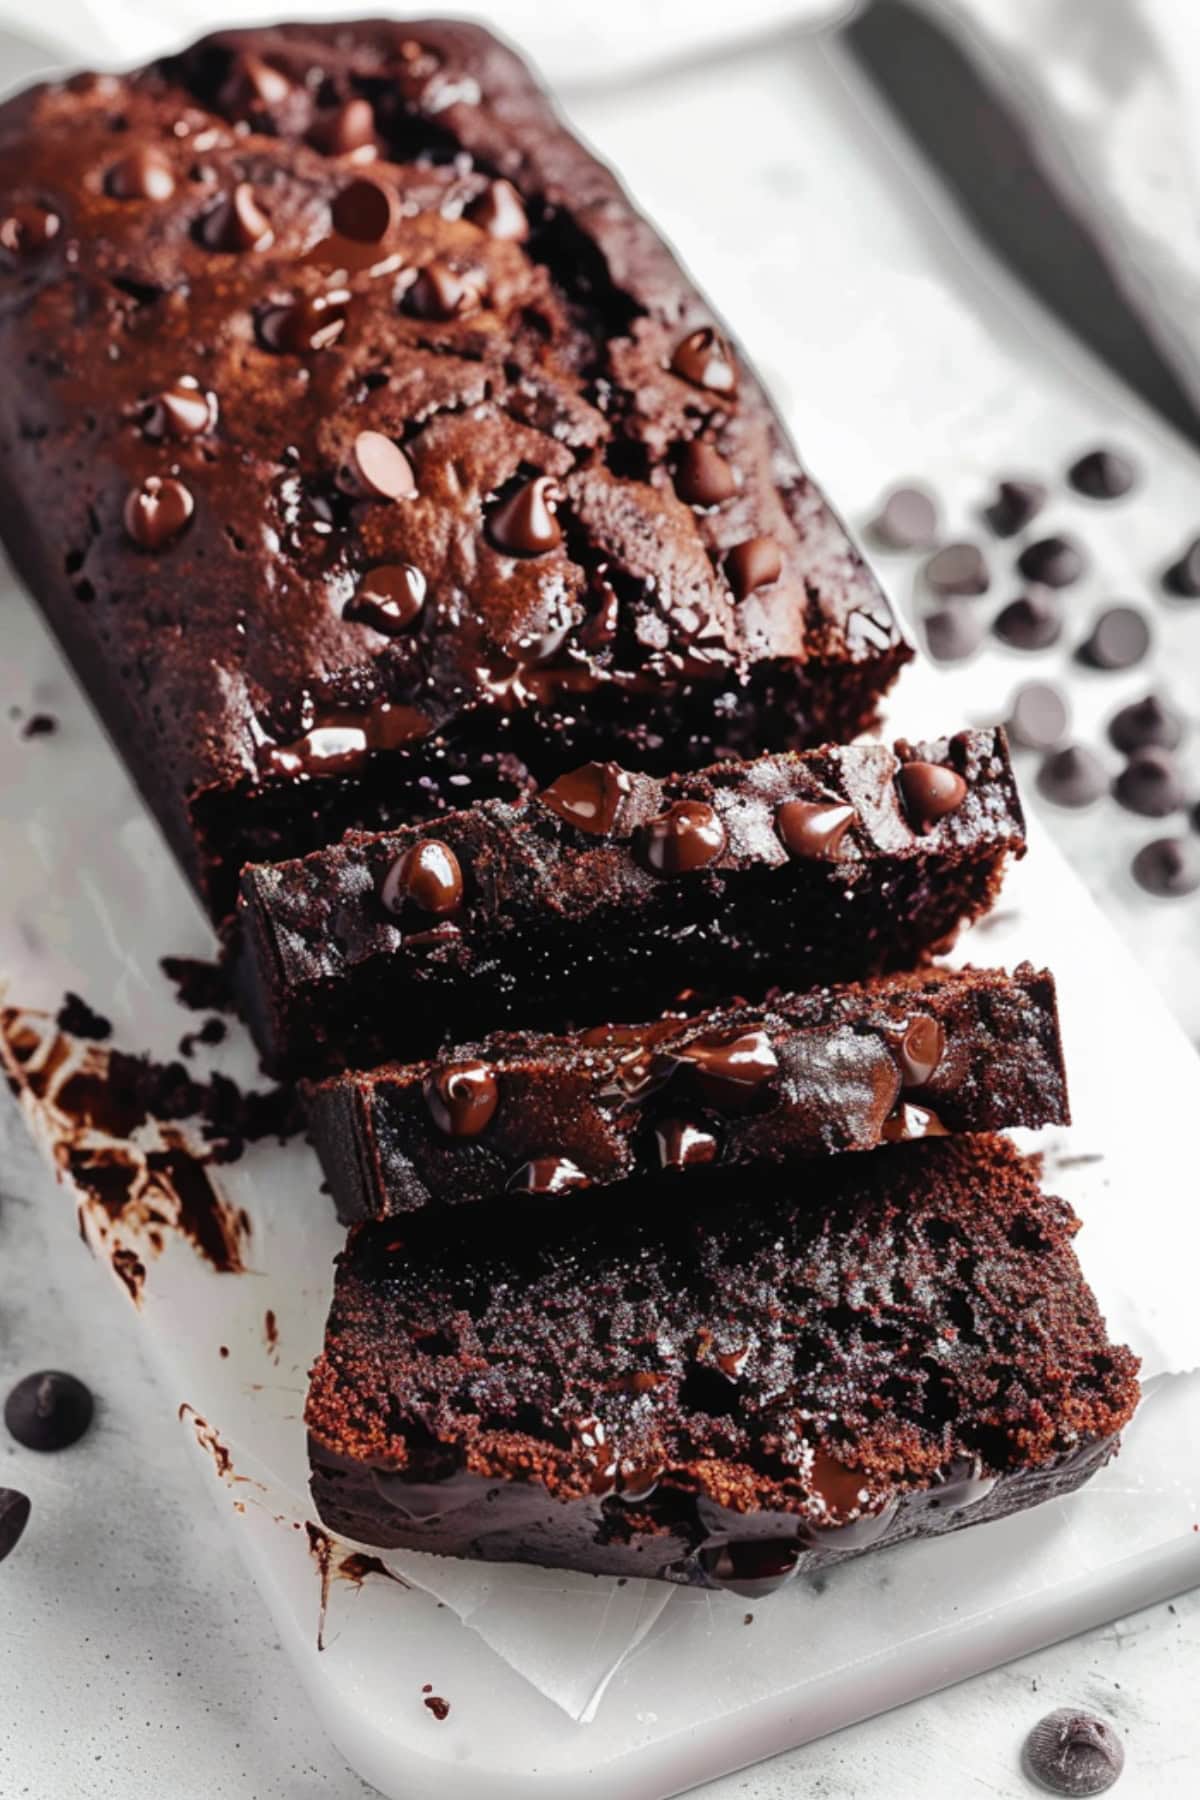 Chocolate loaf bread with chocolate chips.